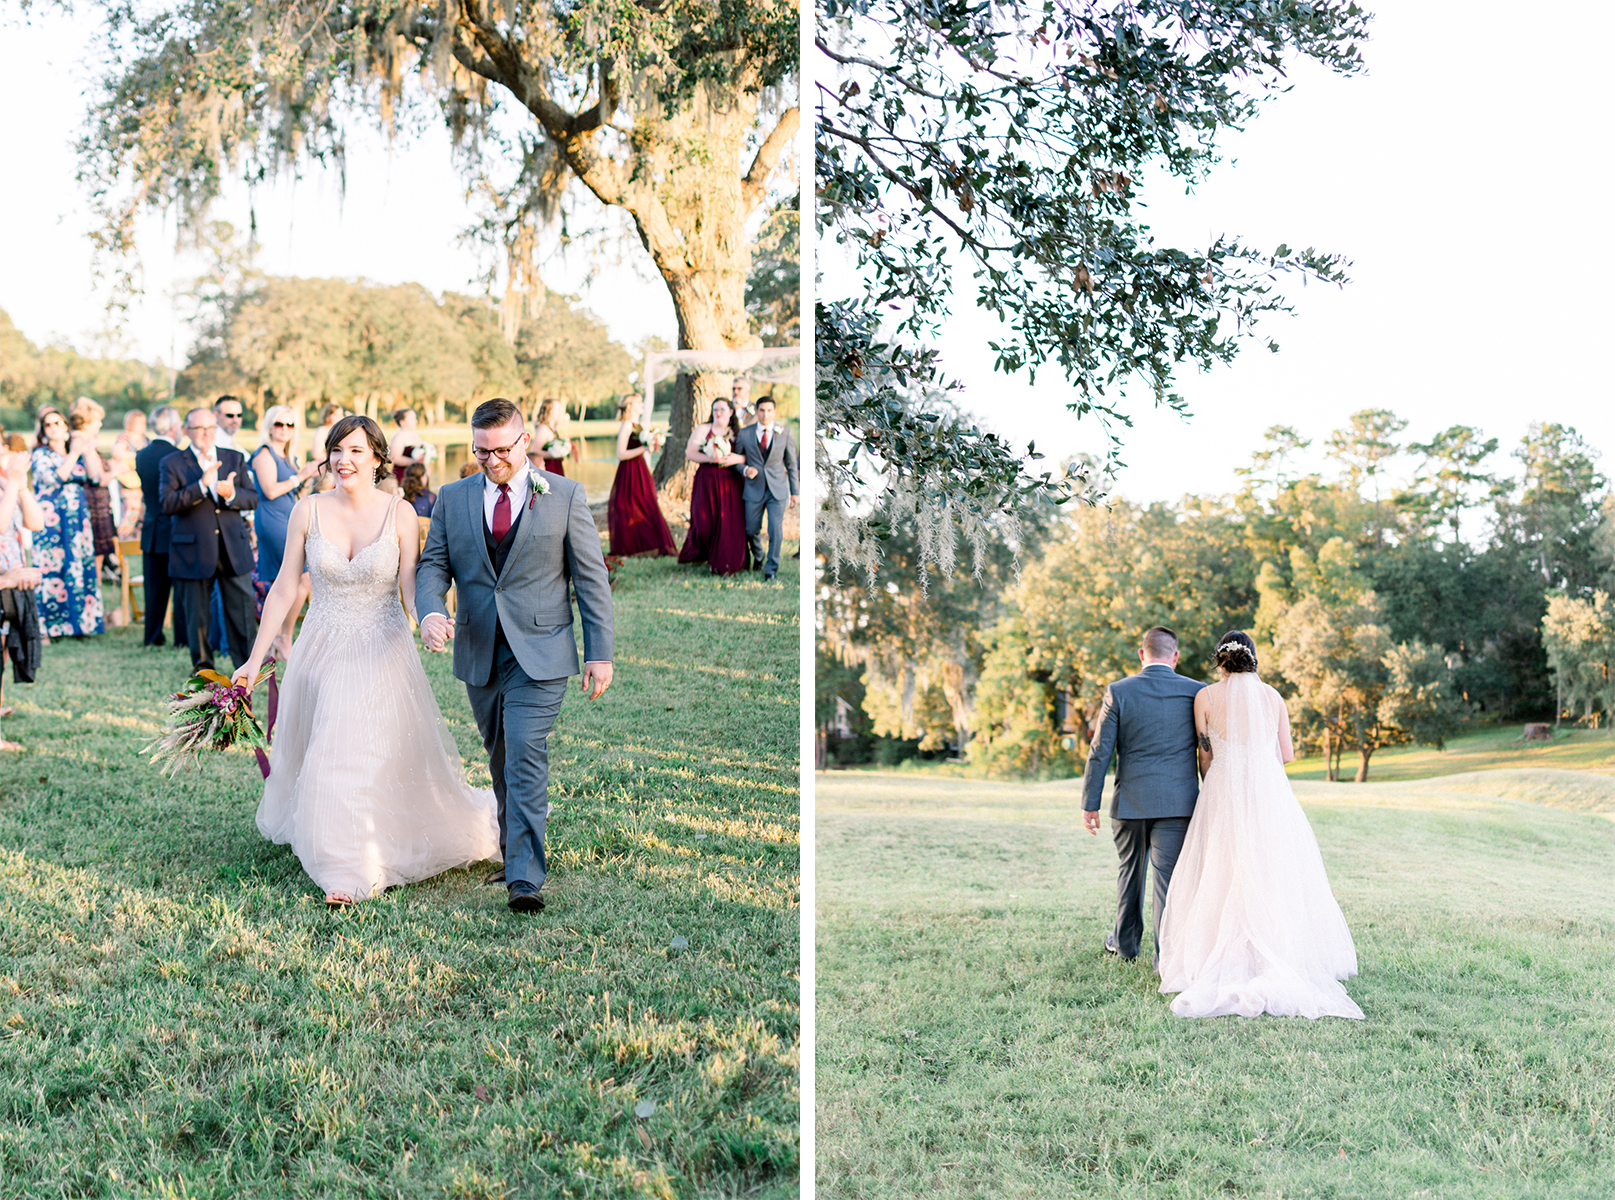 Bride and Groom Recessional